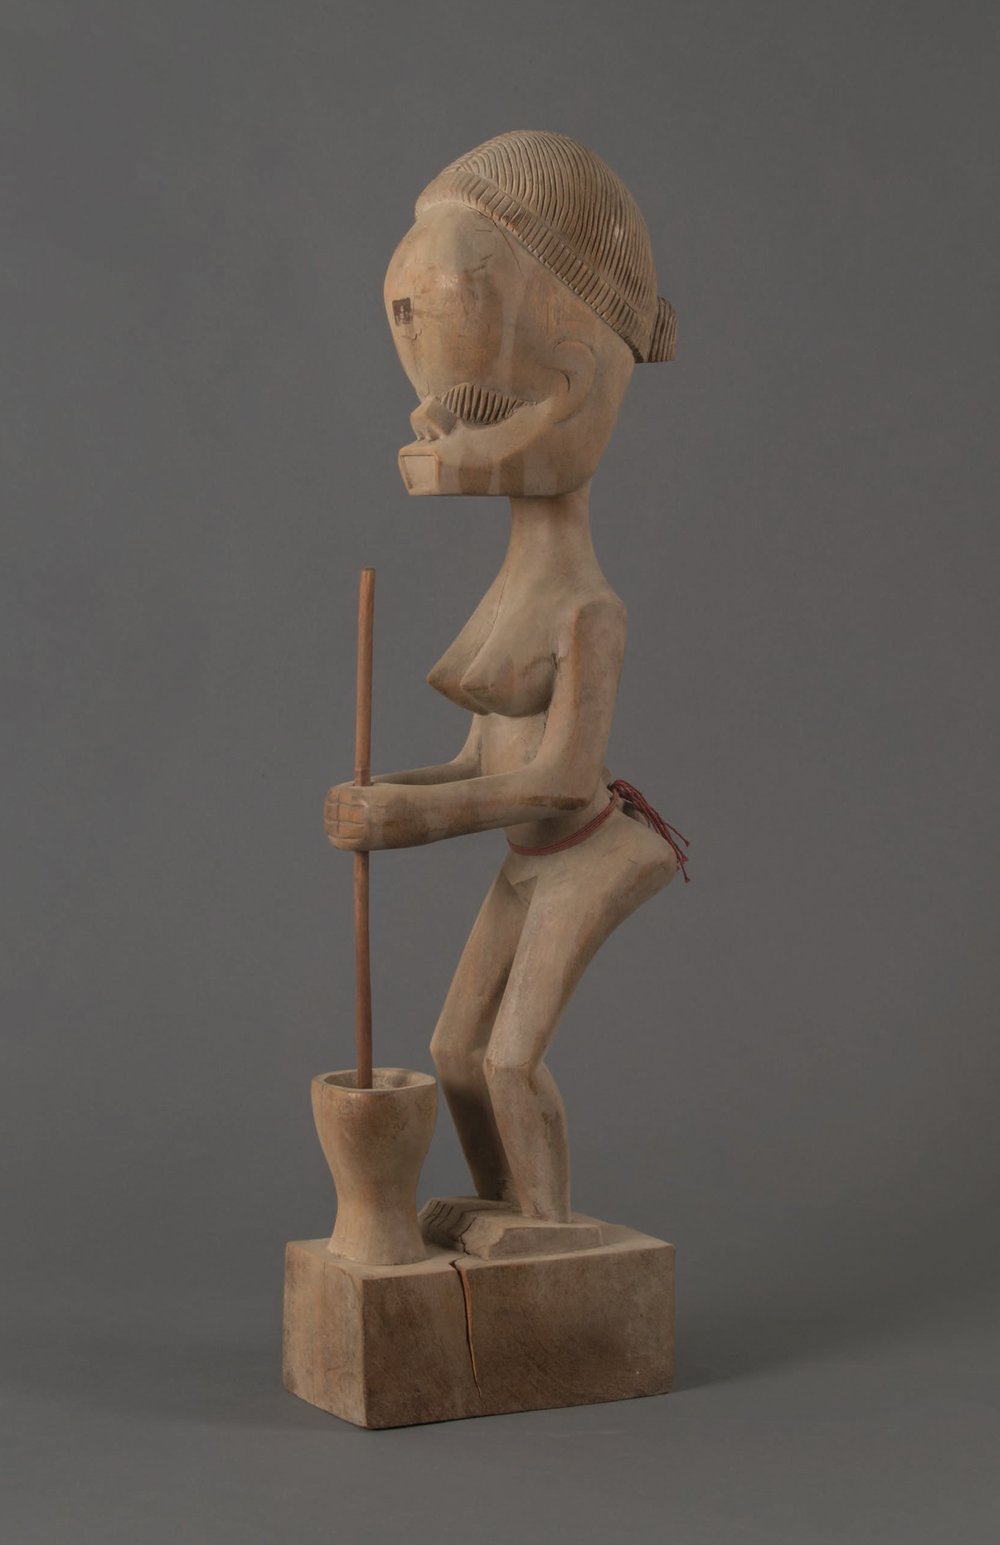 Woman with Mortar and Pestle: Women and Warriors